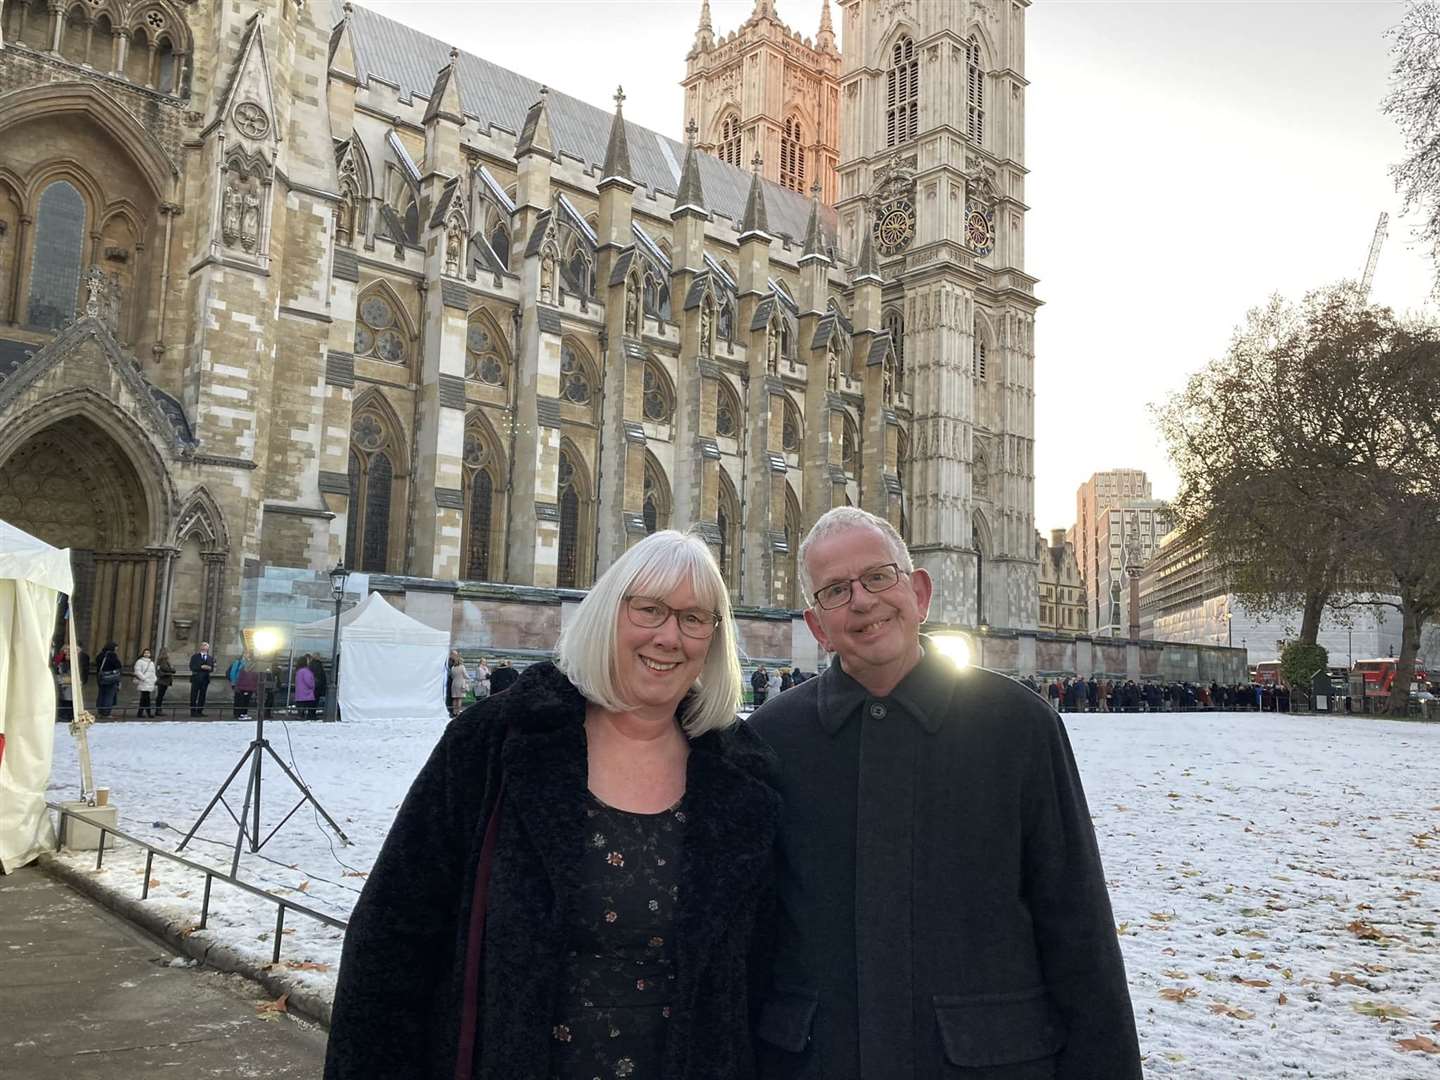 John and Lorna Dempster outside Westminster Abbey.